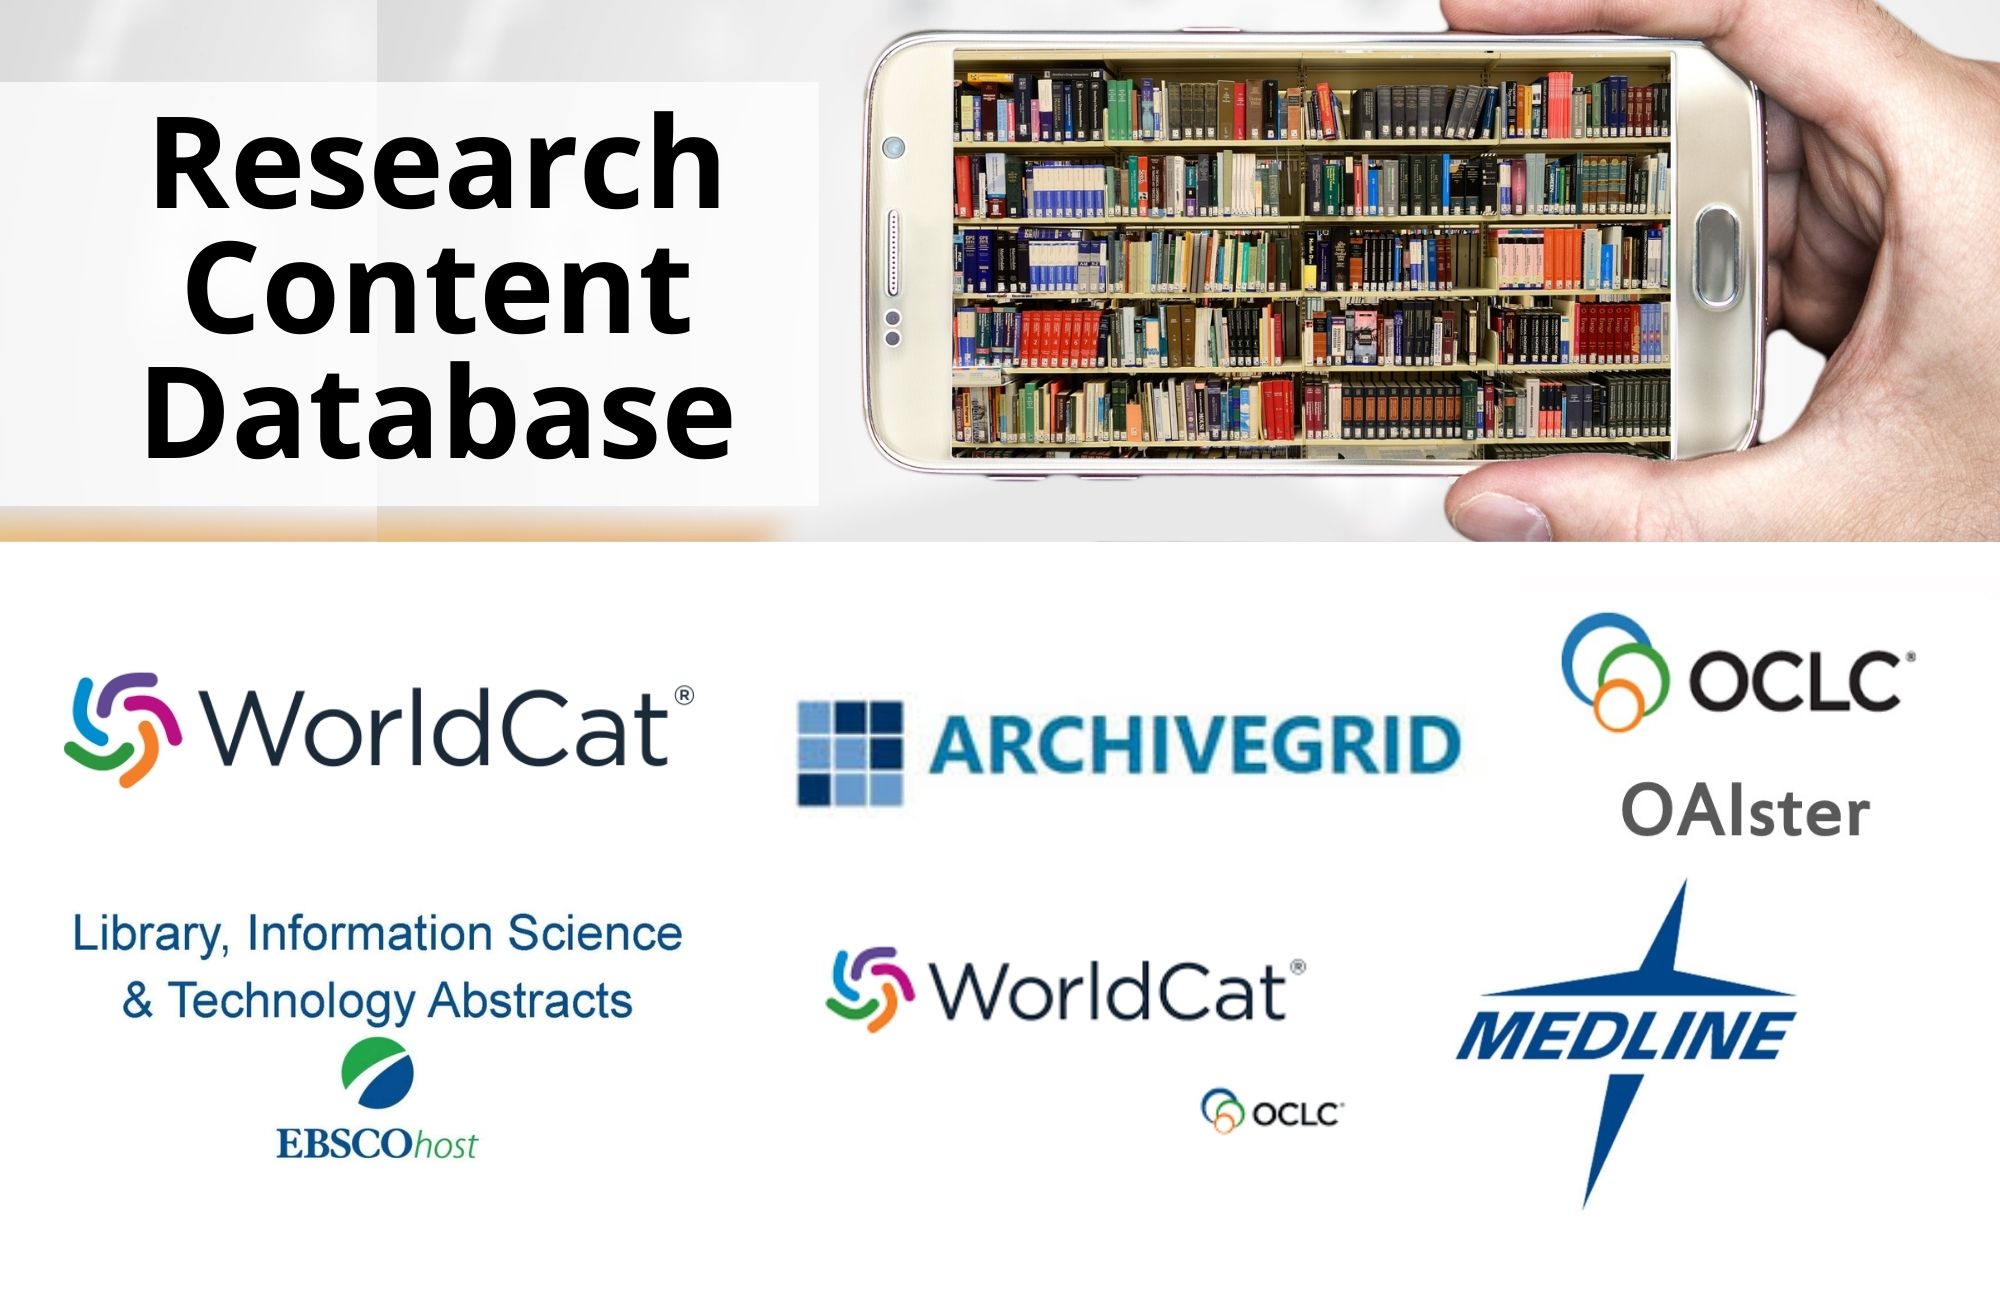 Databases Content Theses - A Vast Source Of Research References To Aid Your Research Study